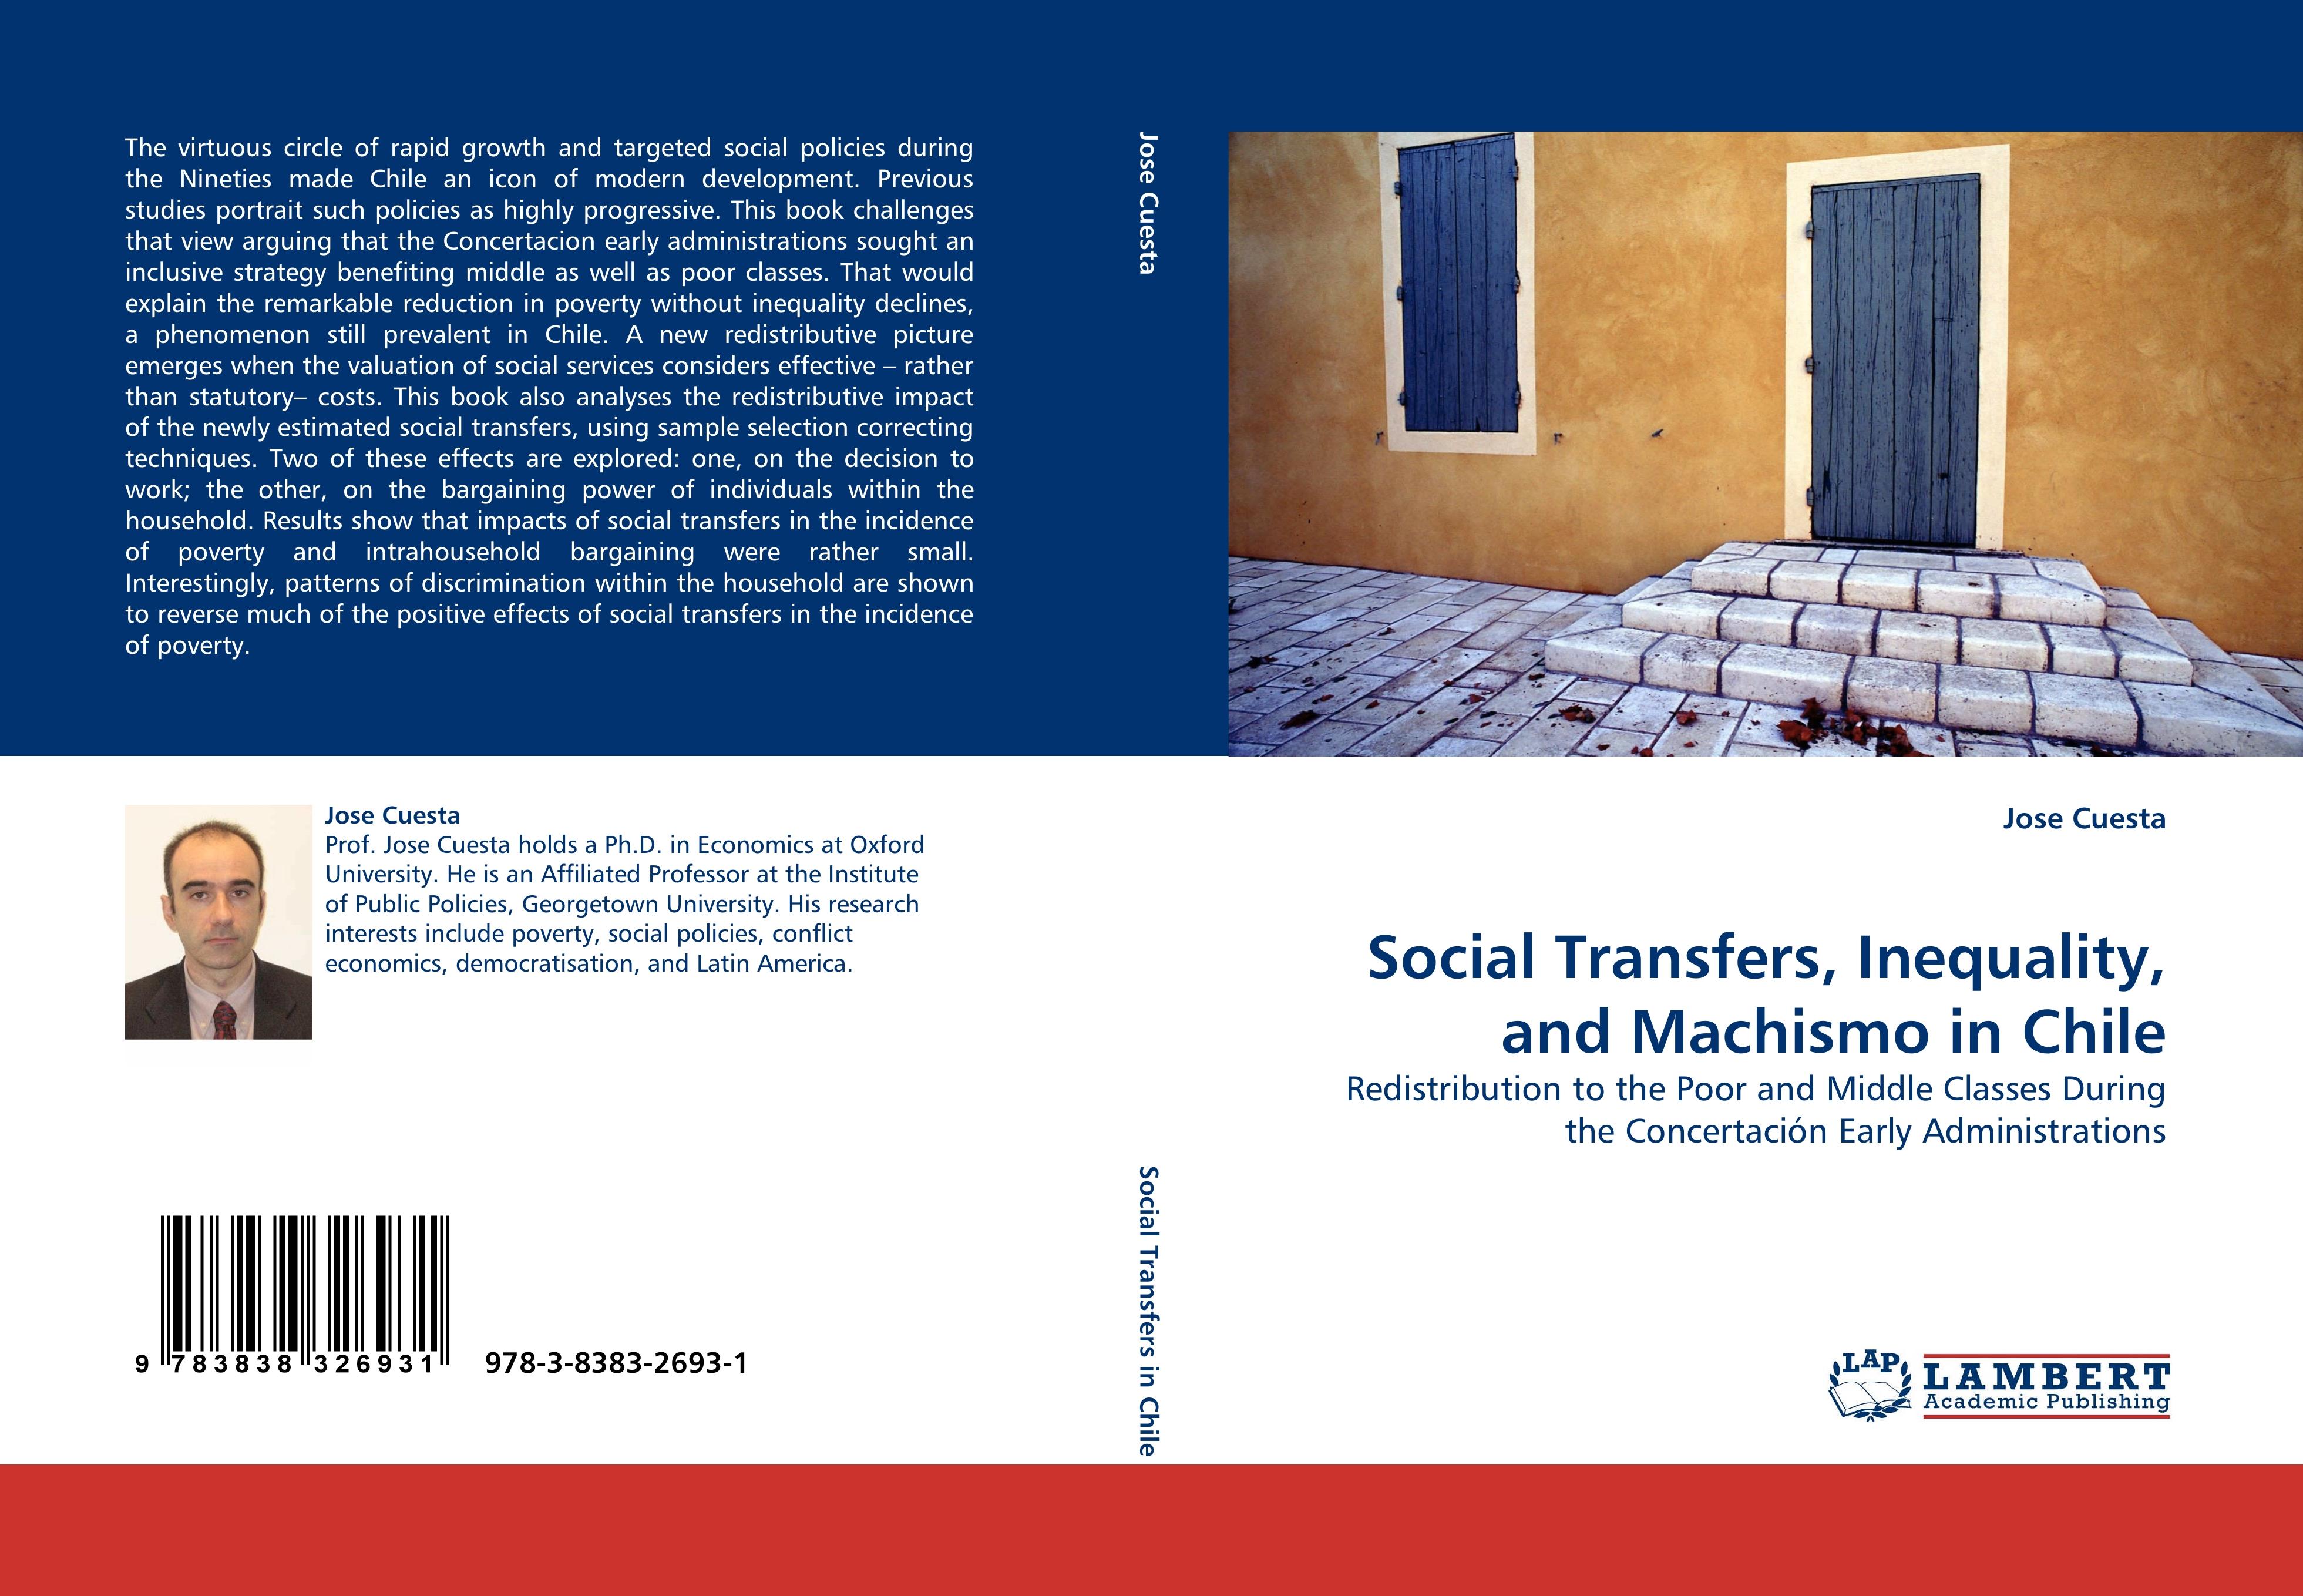 Social Transfers, Inequality, and Machismo in Chile - Jose Cuesta